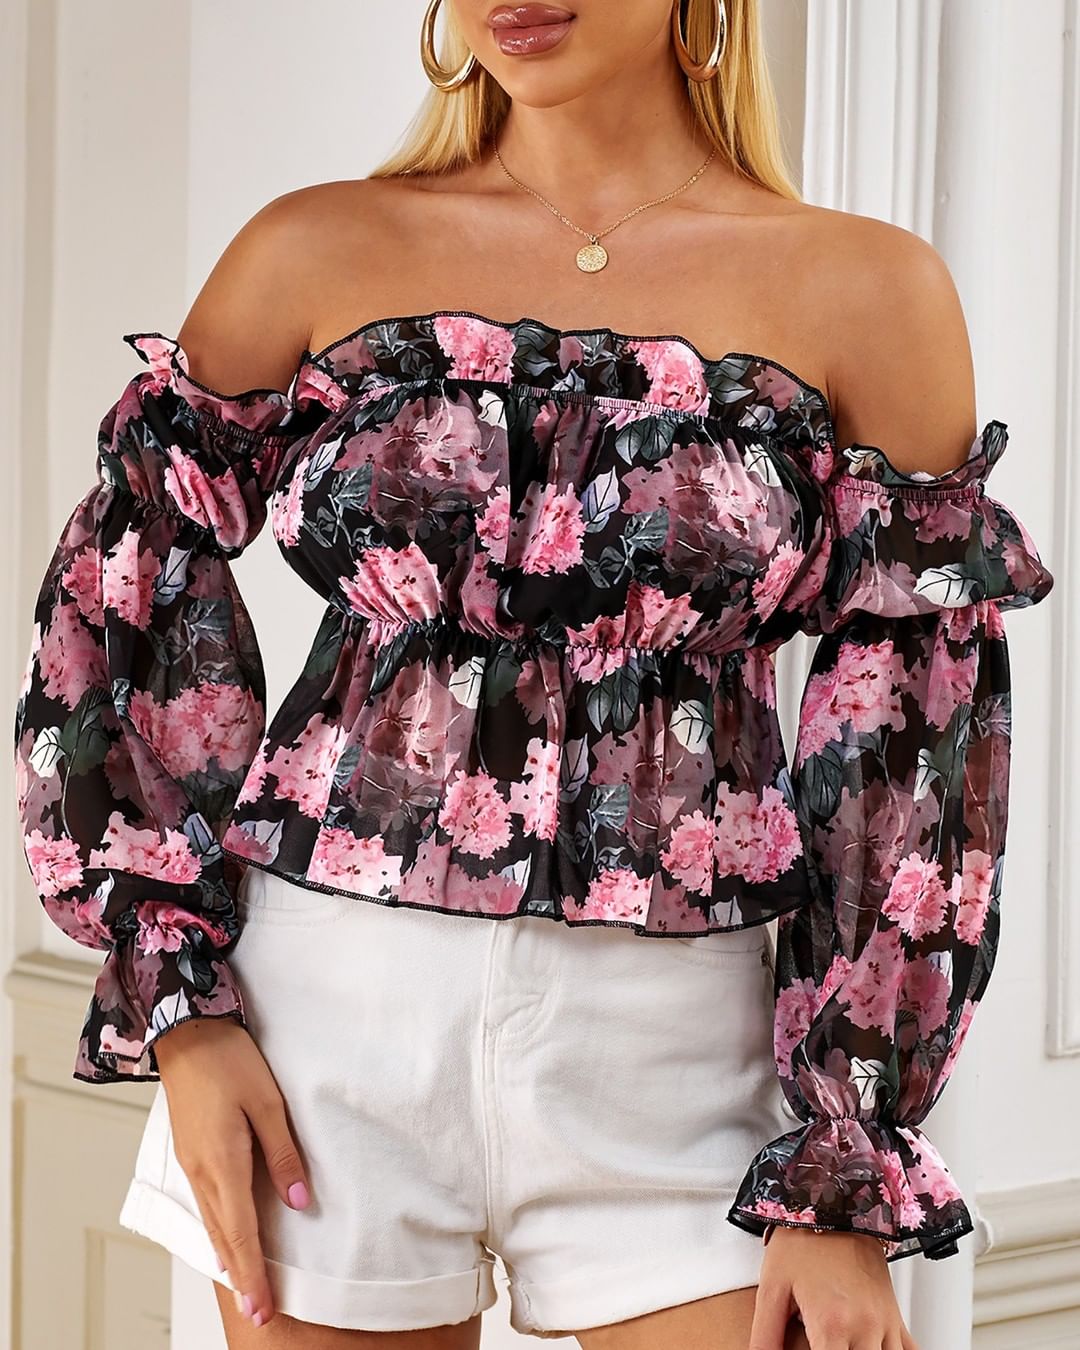 boutiquefeel_official - Floral Print Off Shoulder Ruffles Blouse⁠
Click https://www.boutiquefeel.com to ⁠
search LZZ1977 get size and price details ⁠
⁠